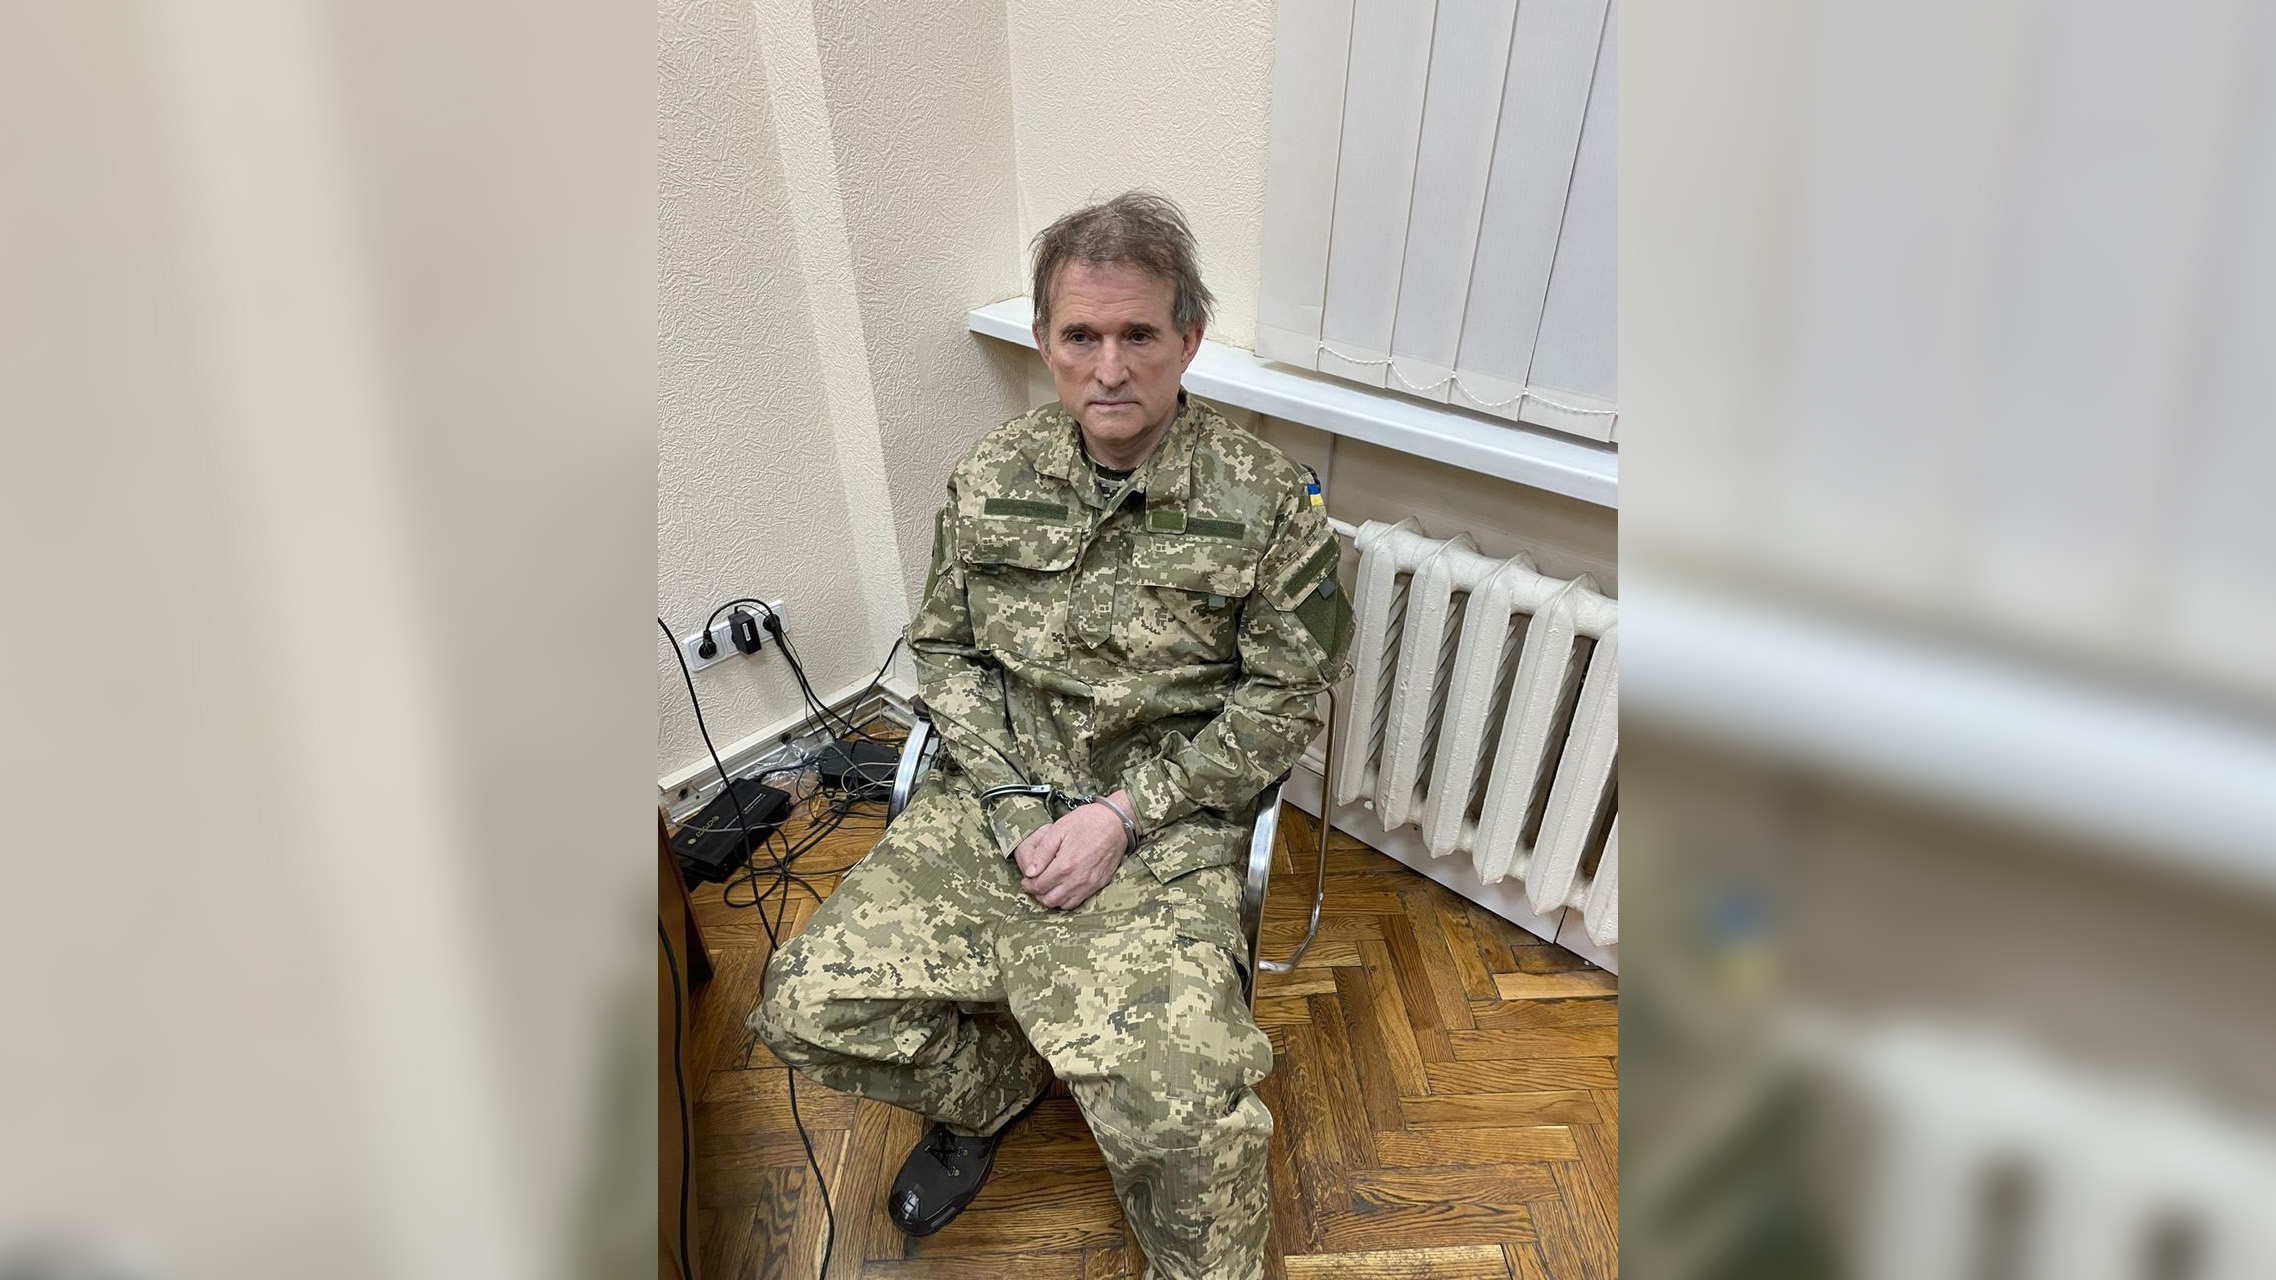 Viktor Medvedchuk, a pro-Russian Ukrainian politician and oligarch sits in a chair with his hands cuffed after a "special operation" was carried out in Ukraine on April 12.